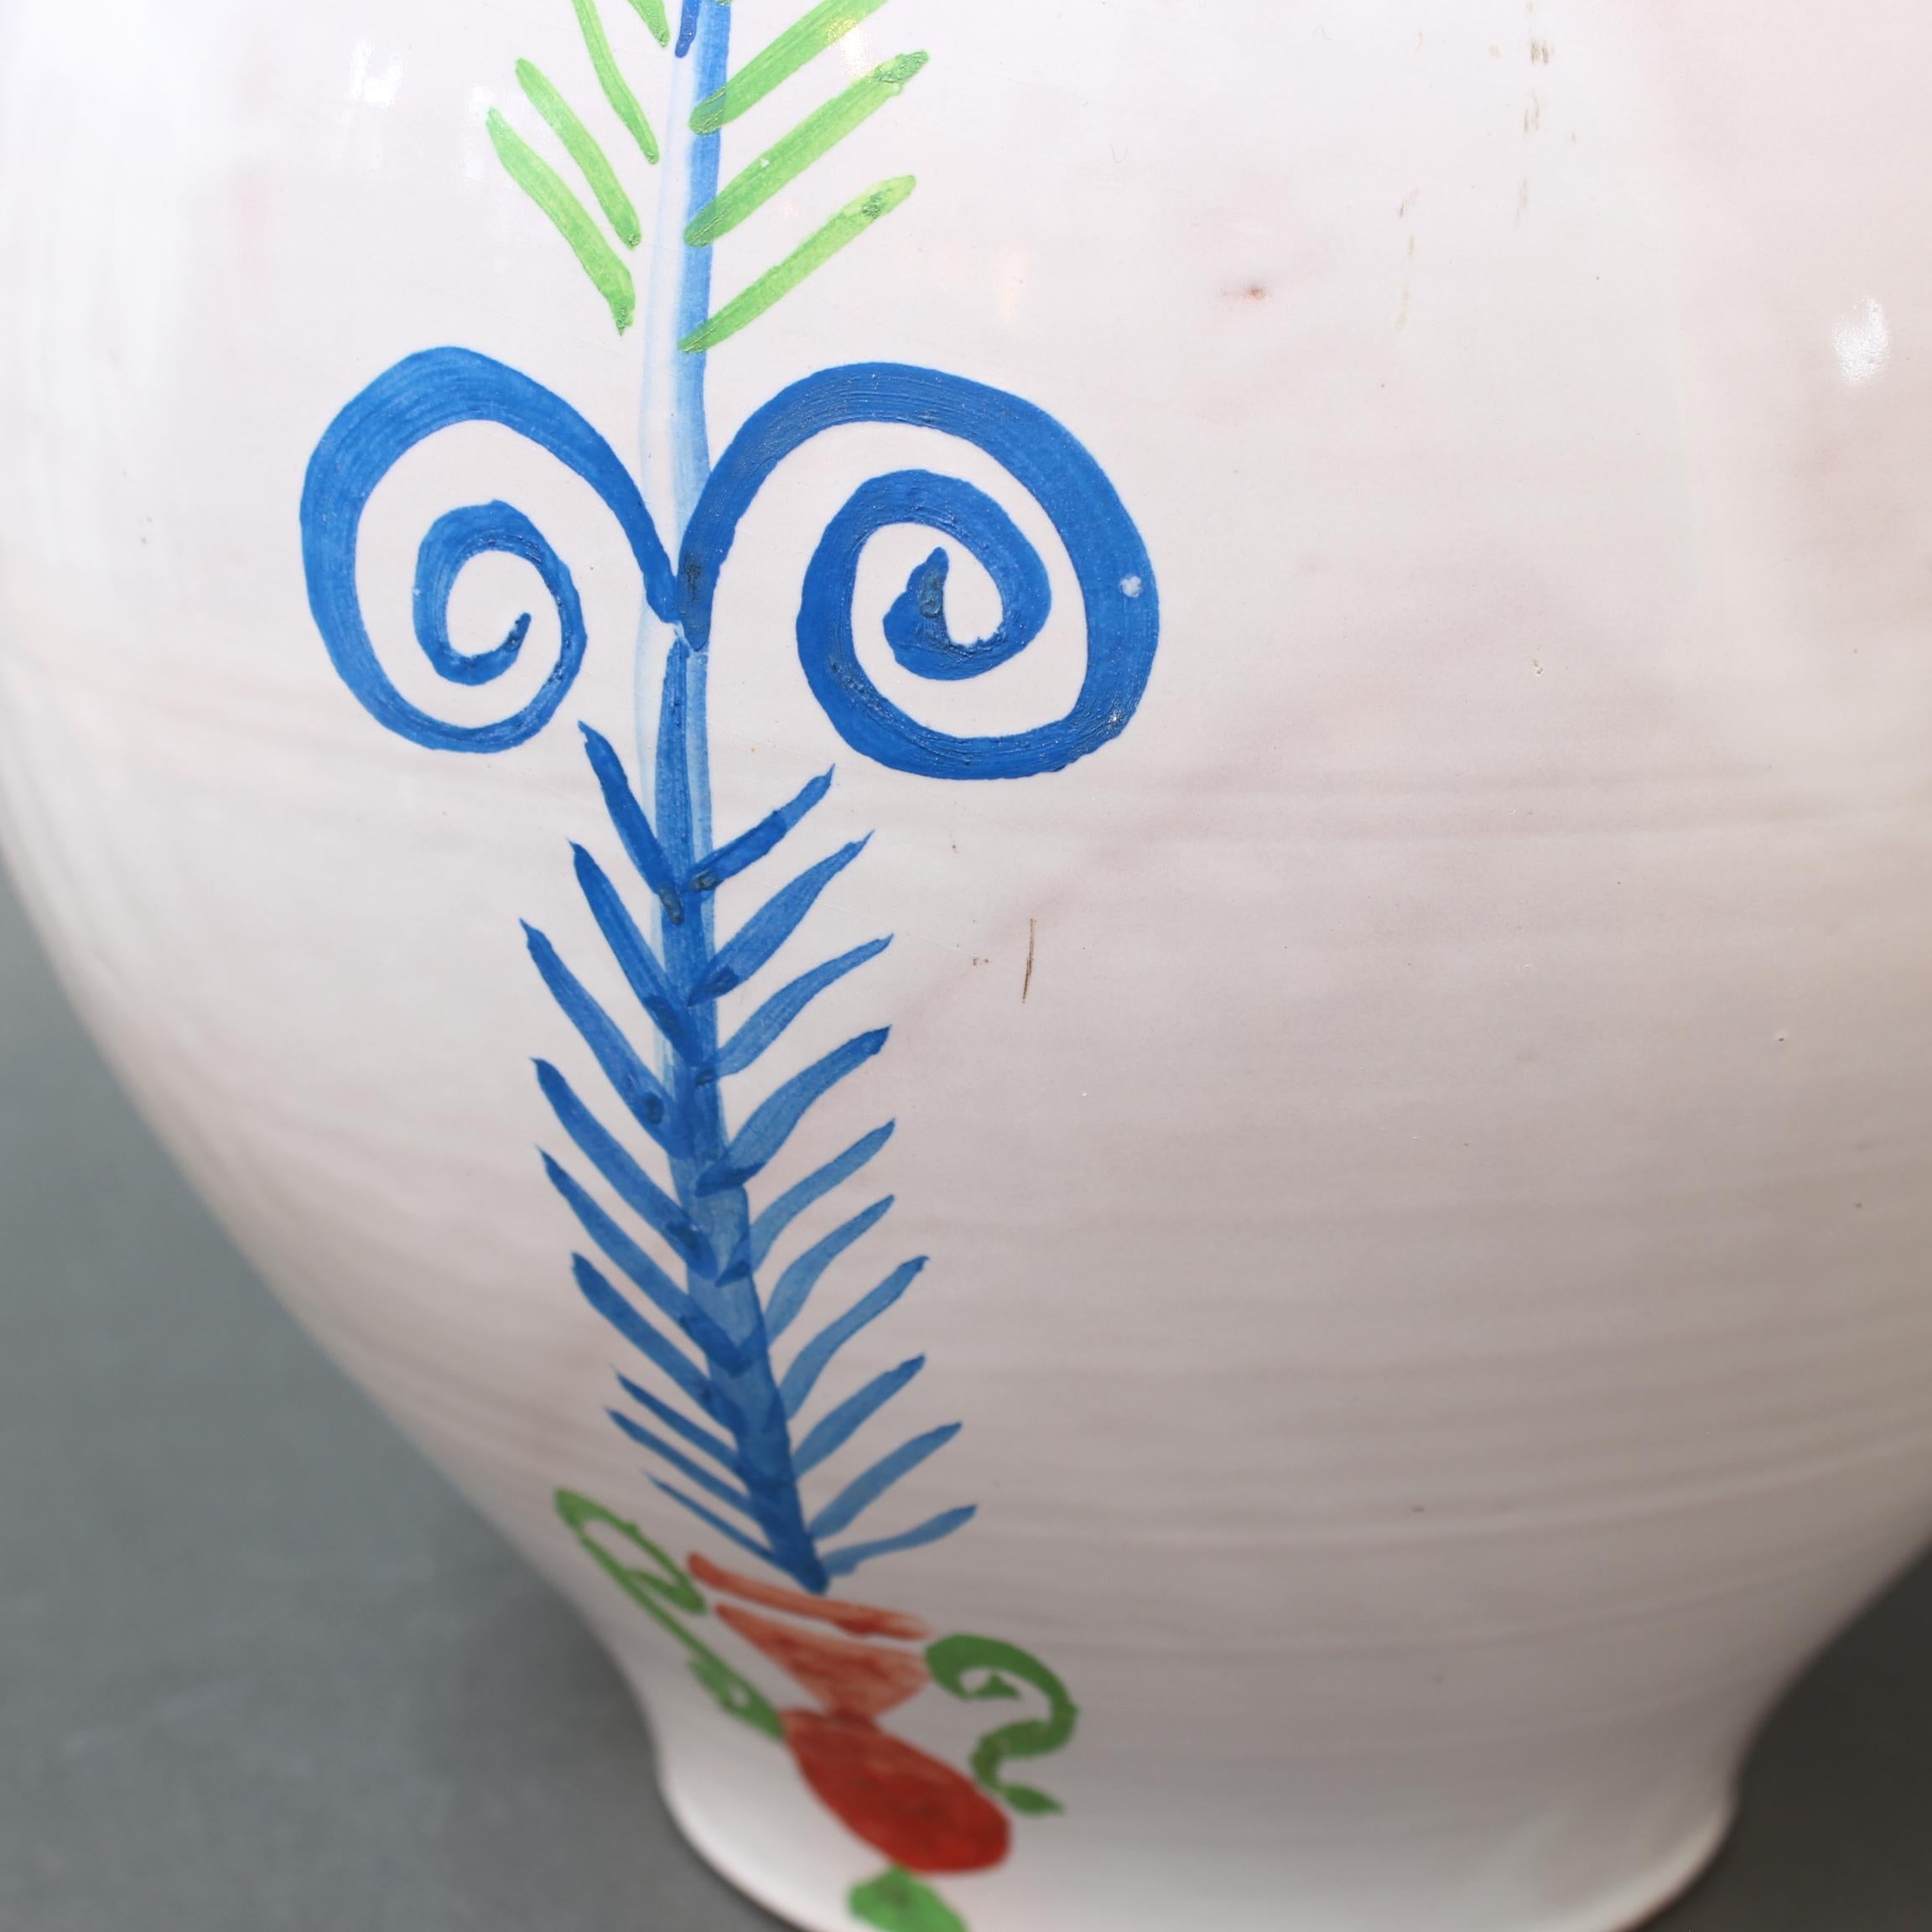 Vintage French Hand-Painted Ceramic Vase by Roger Capron (circa 1960s) For Sale 9